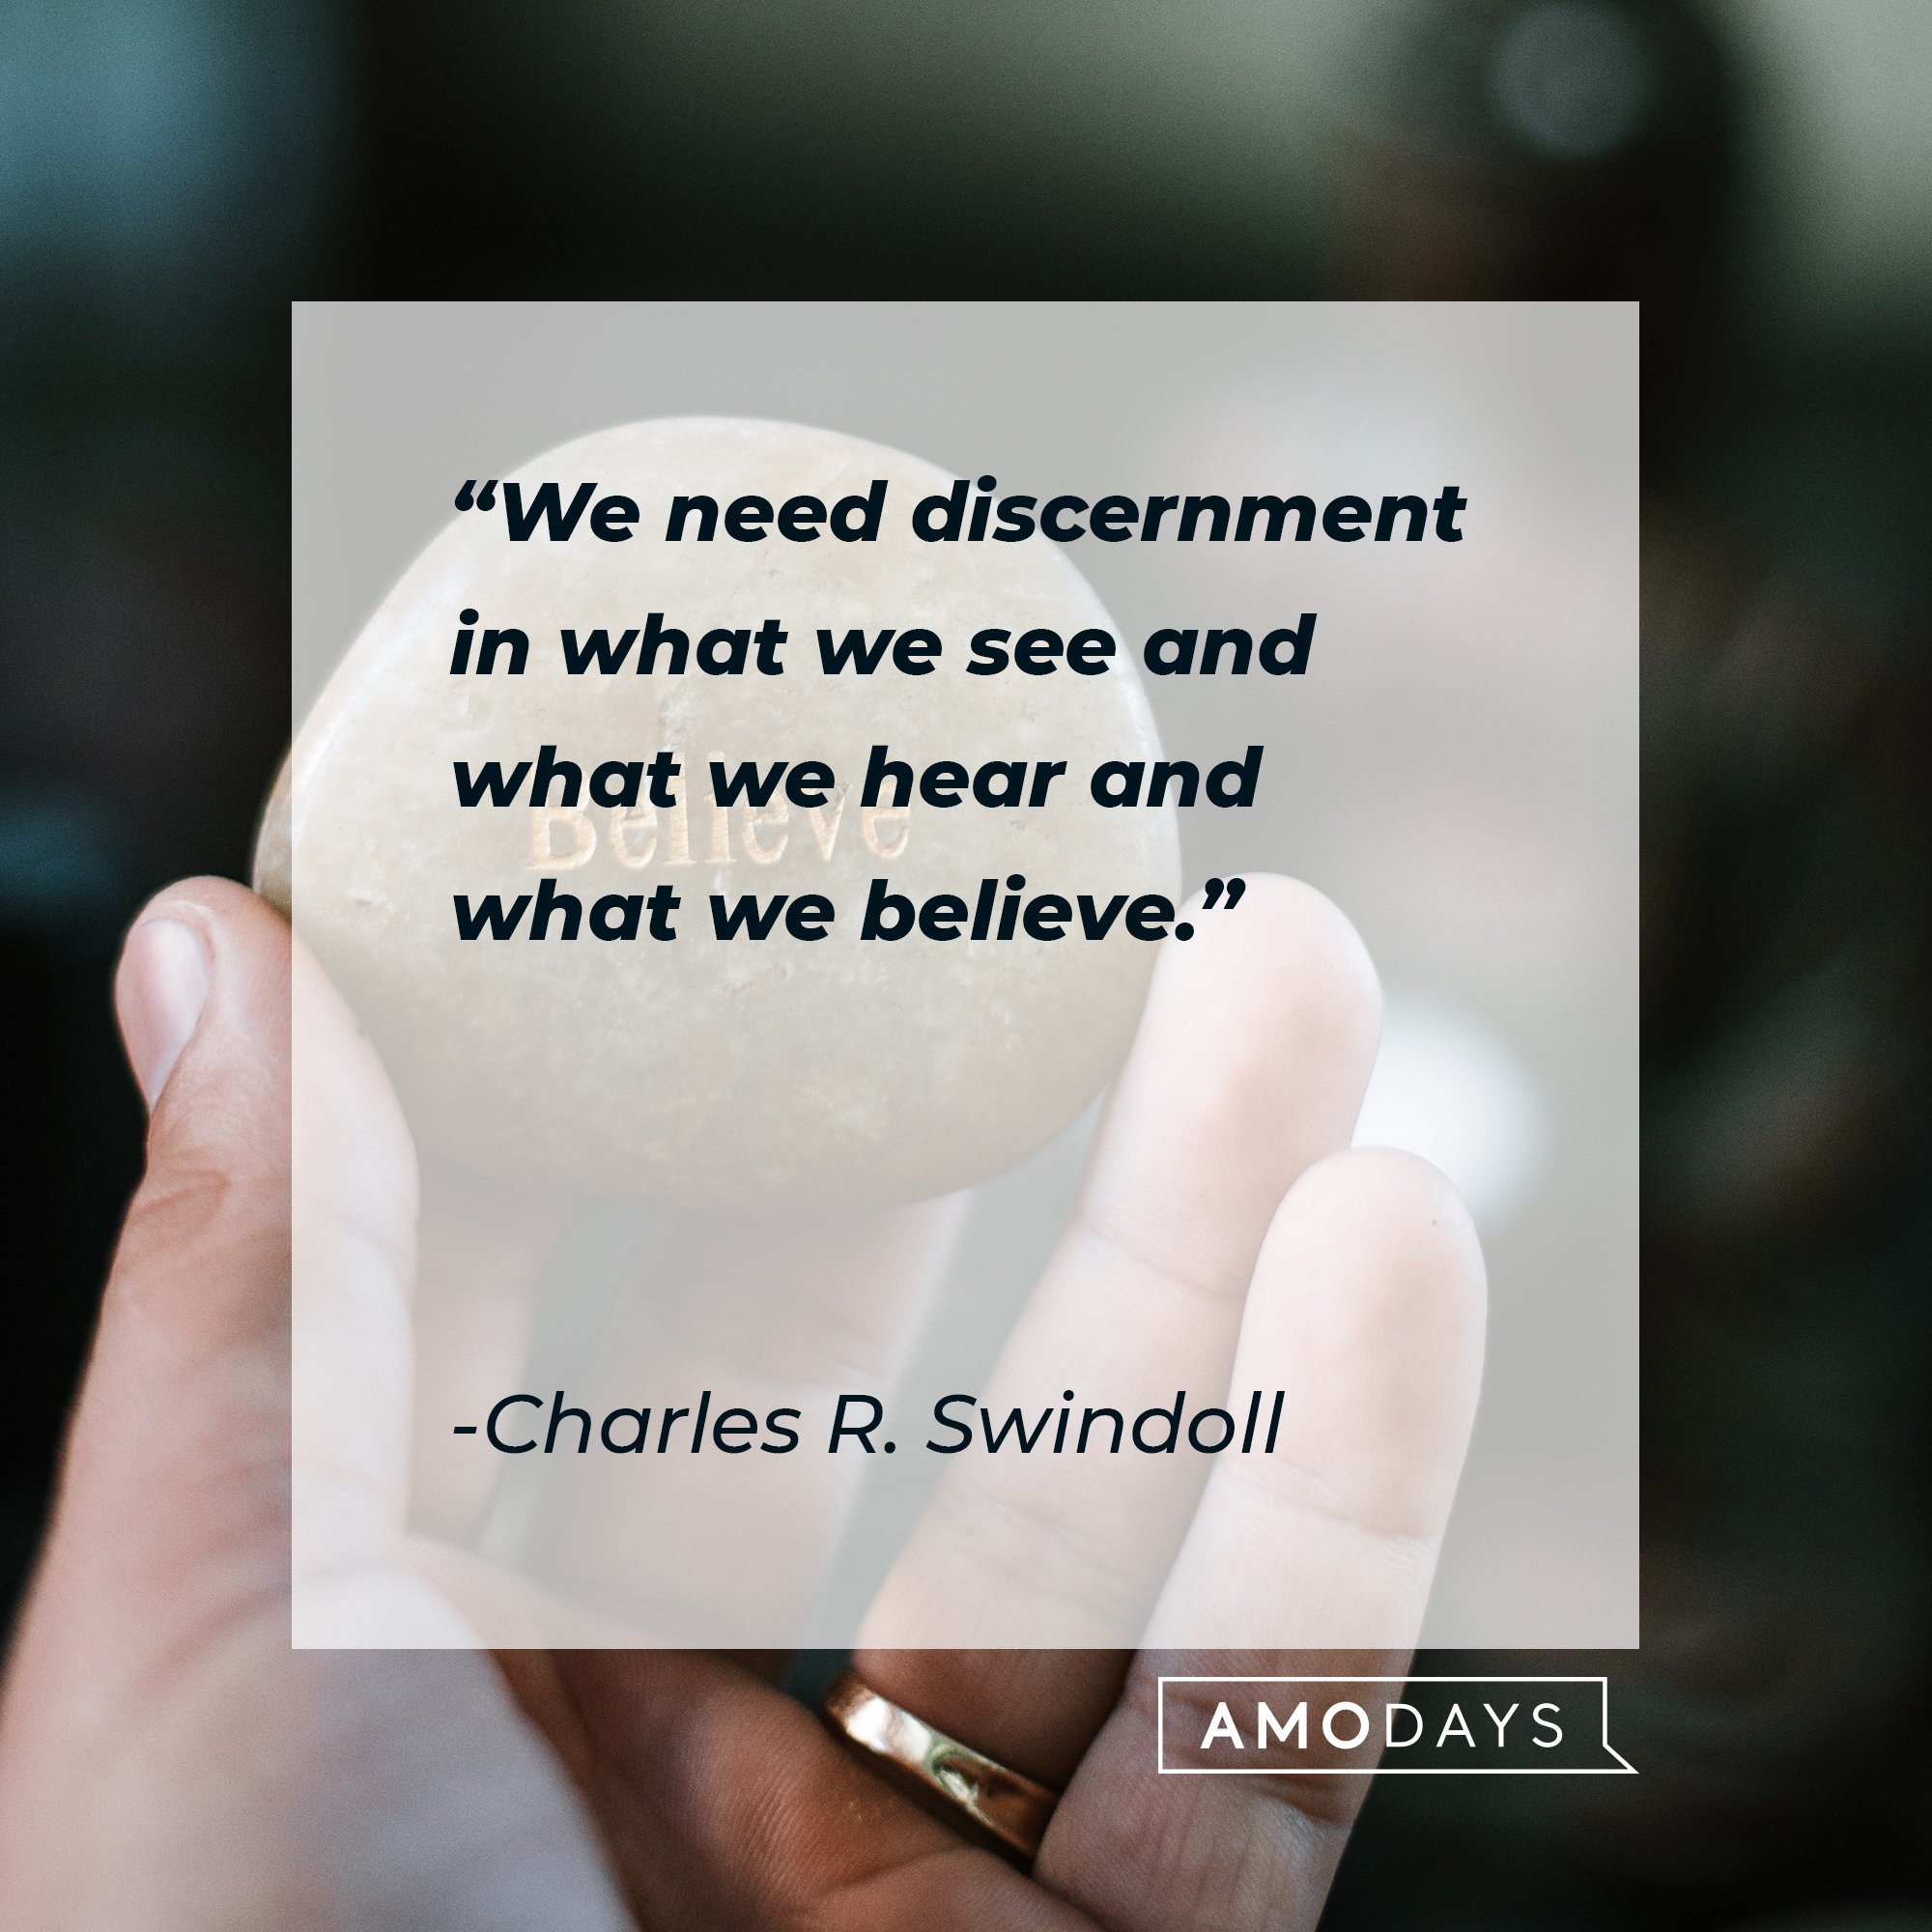 Charles R. Swindoll’s quote: "We need discernment in what we see and what we hear and what we believe." | Image: AmoDays